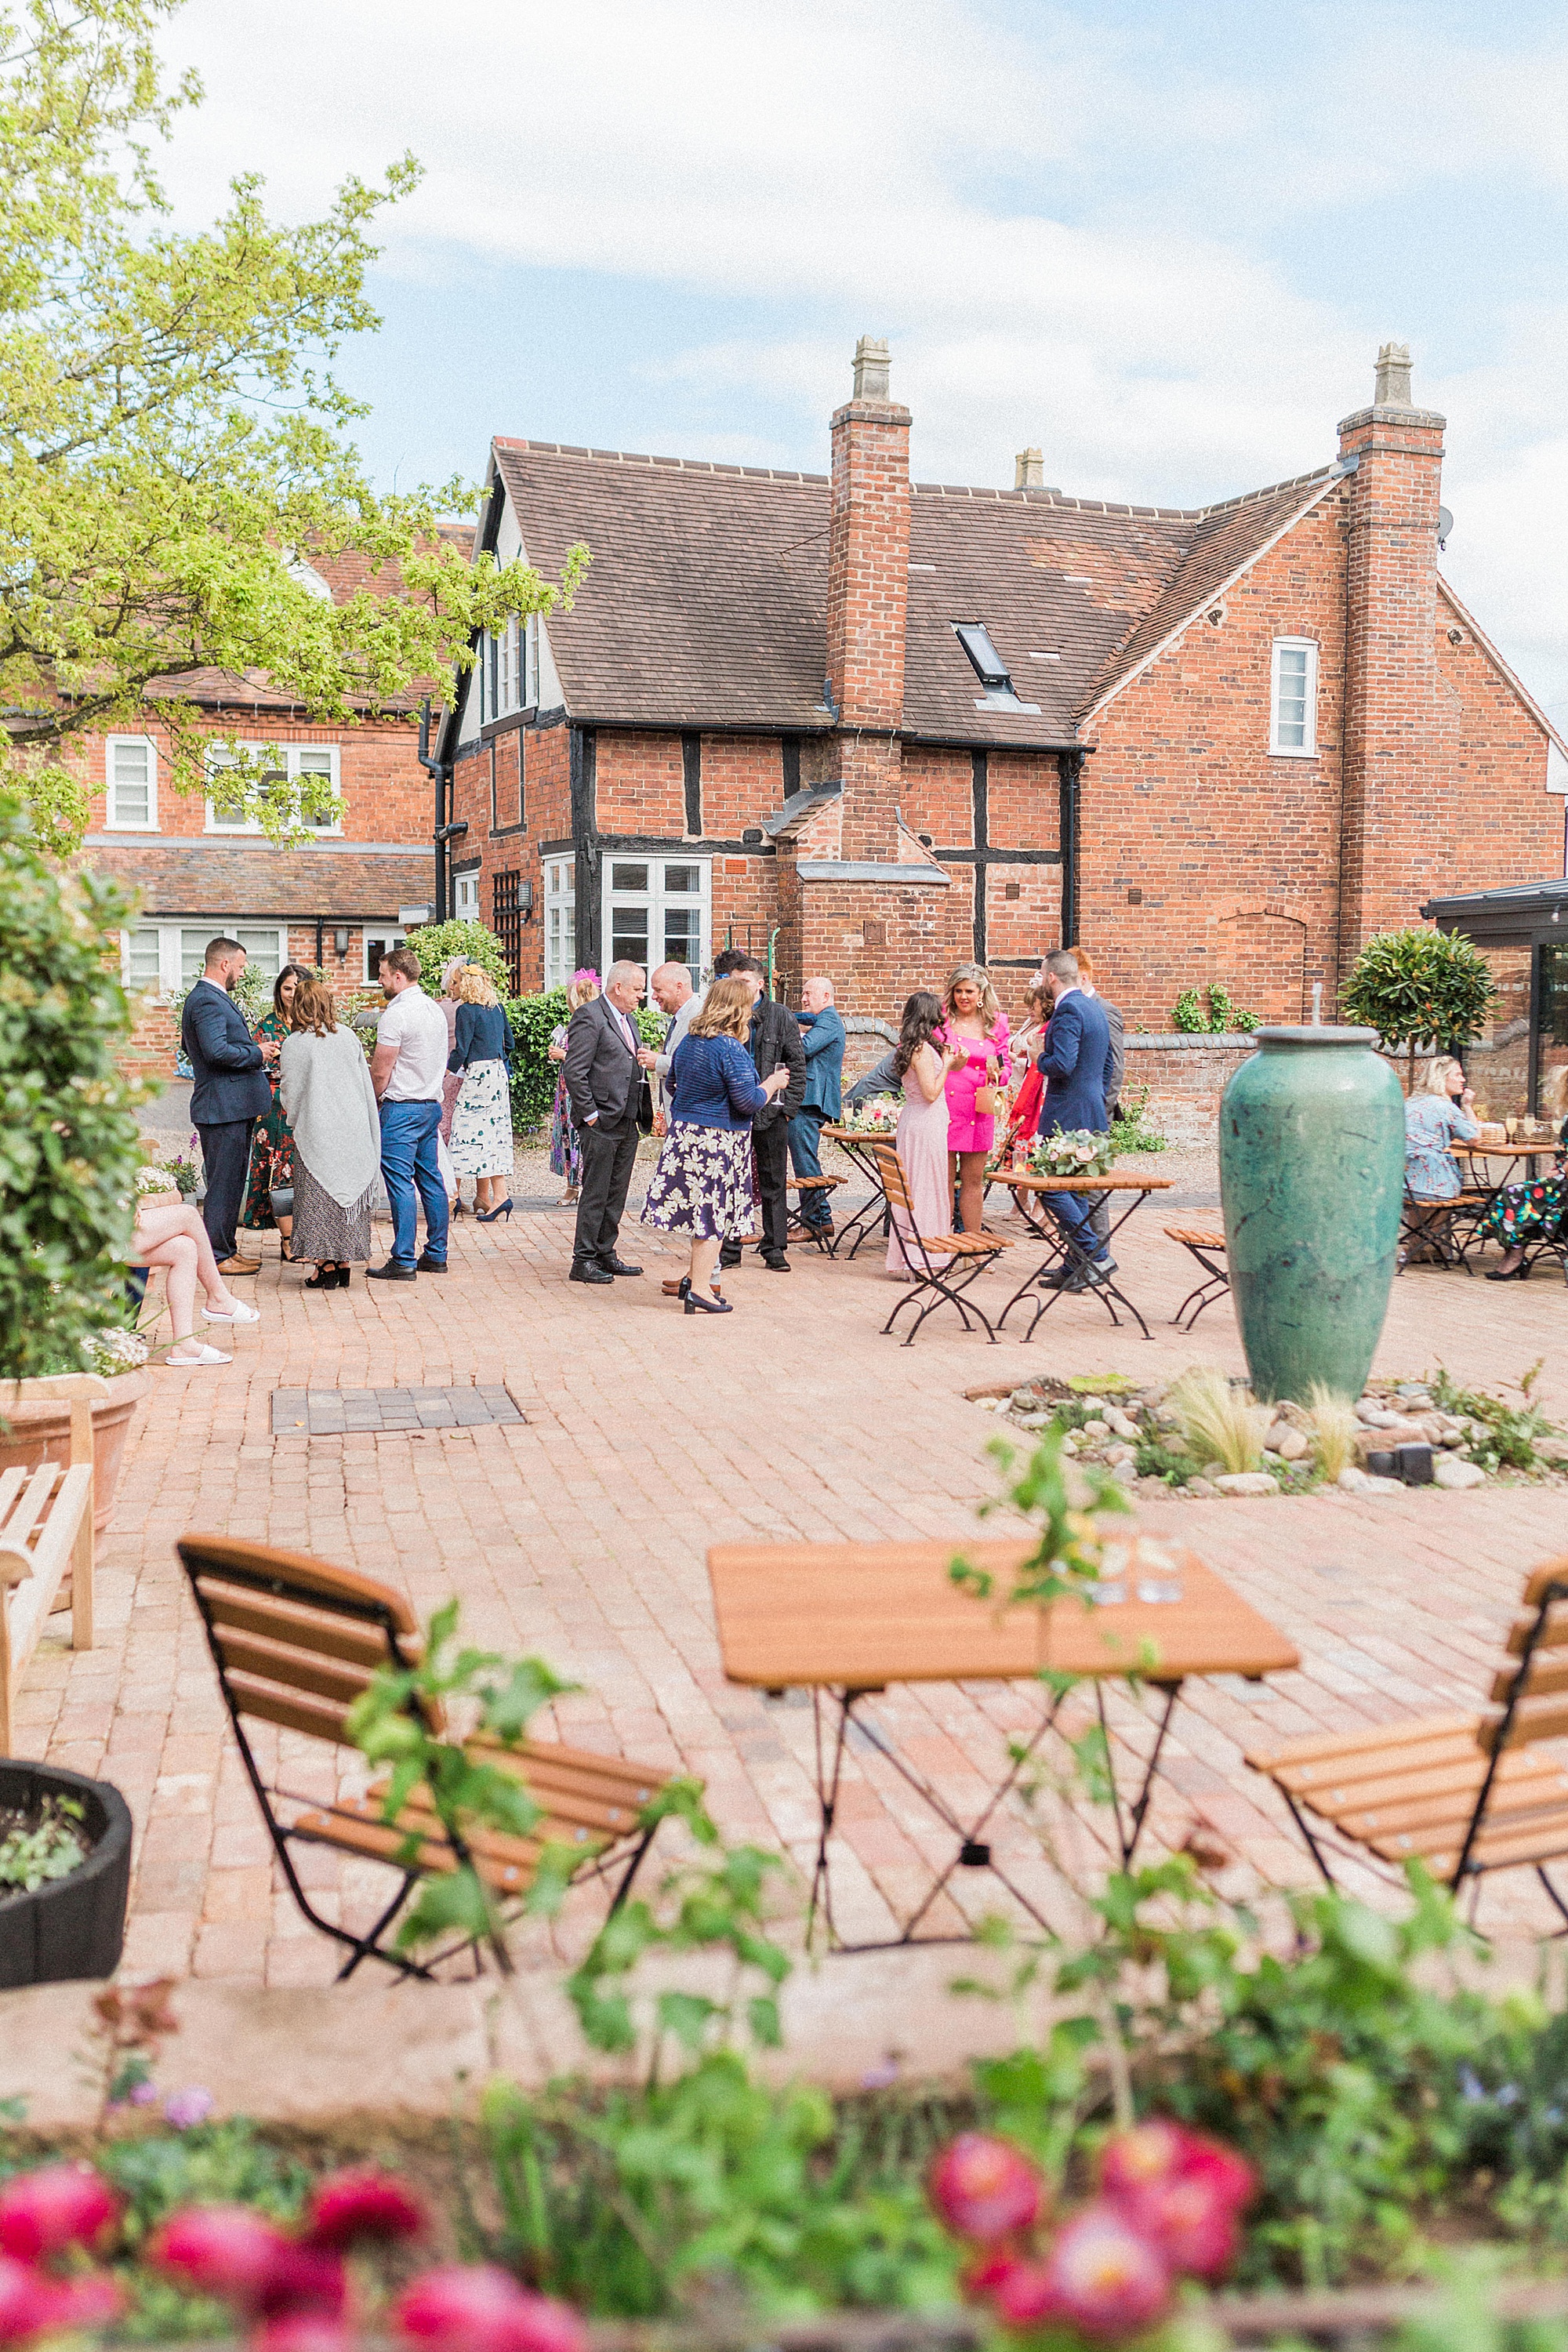 photo of the courtyard at curradine barns during a drinks reception with guests drinking, eating canapes and talking with each other